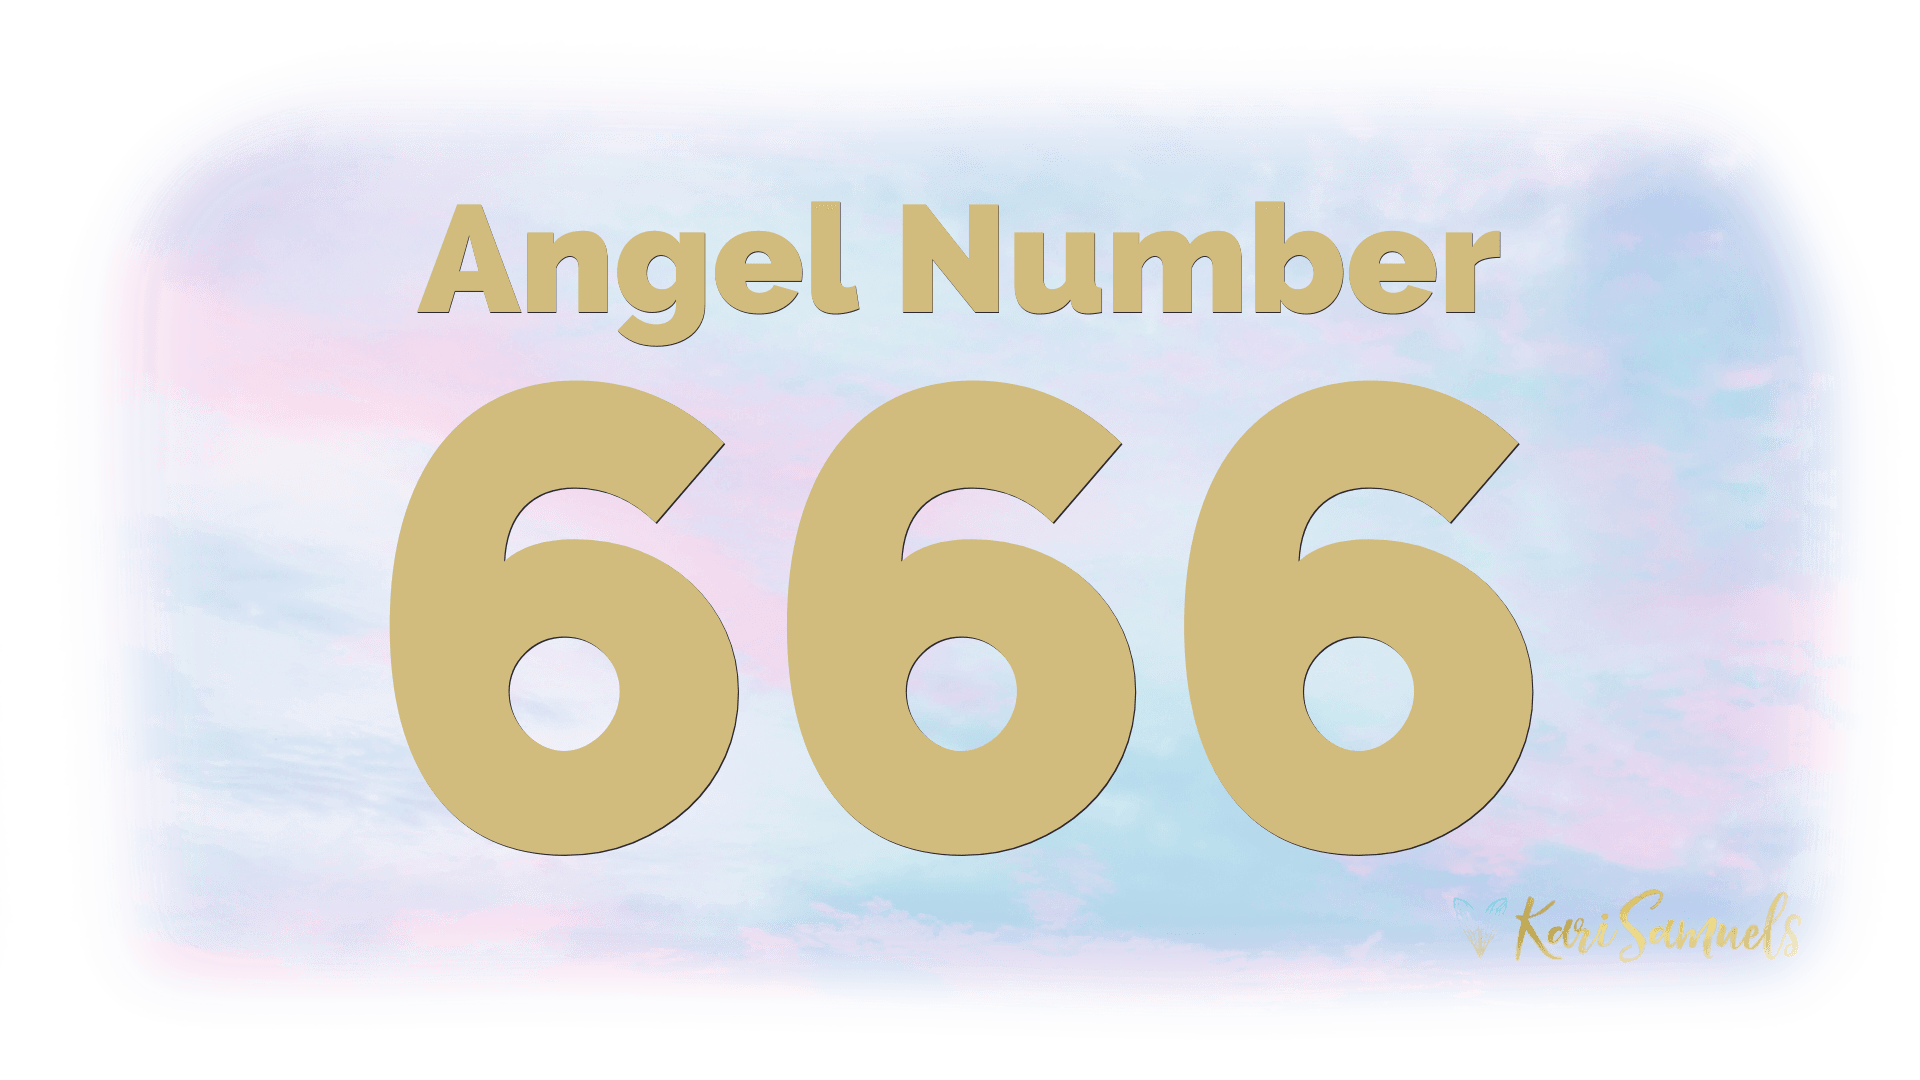 Angel number 666 in light blue and pink clouds in the background.